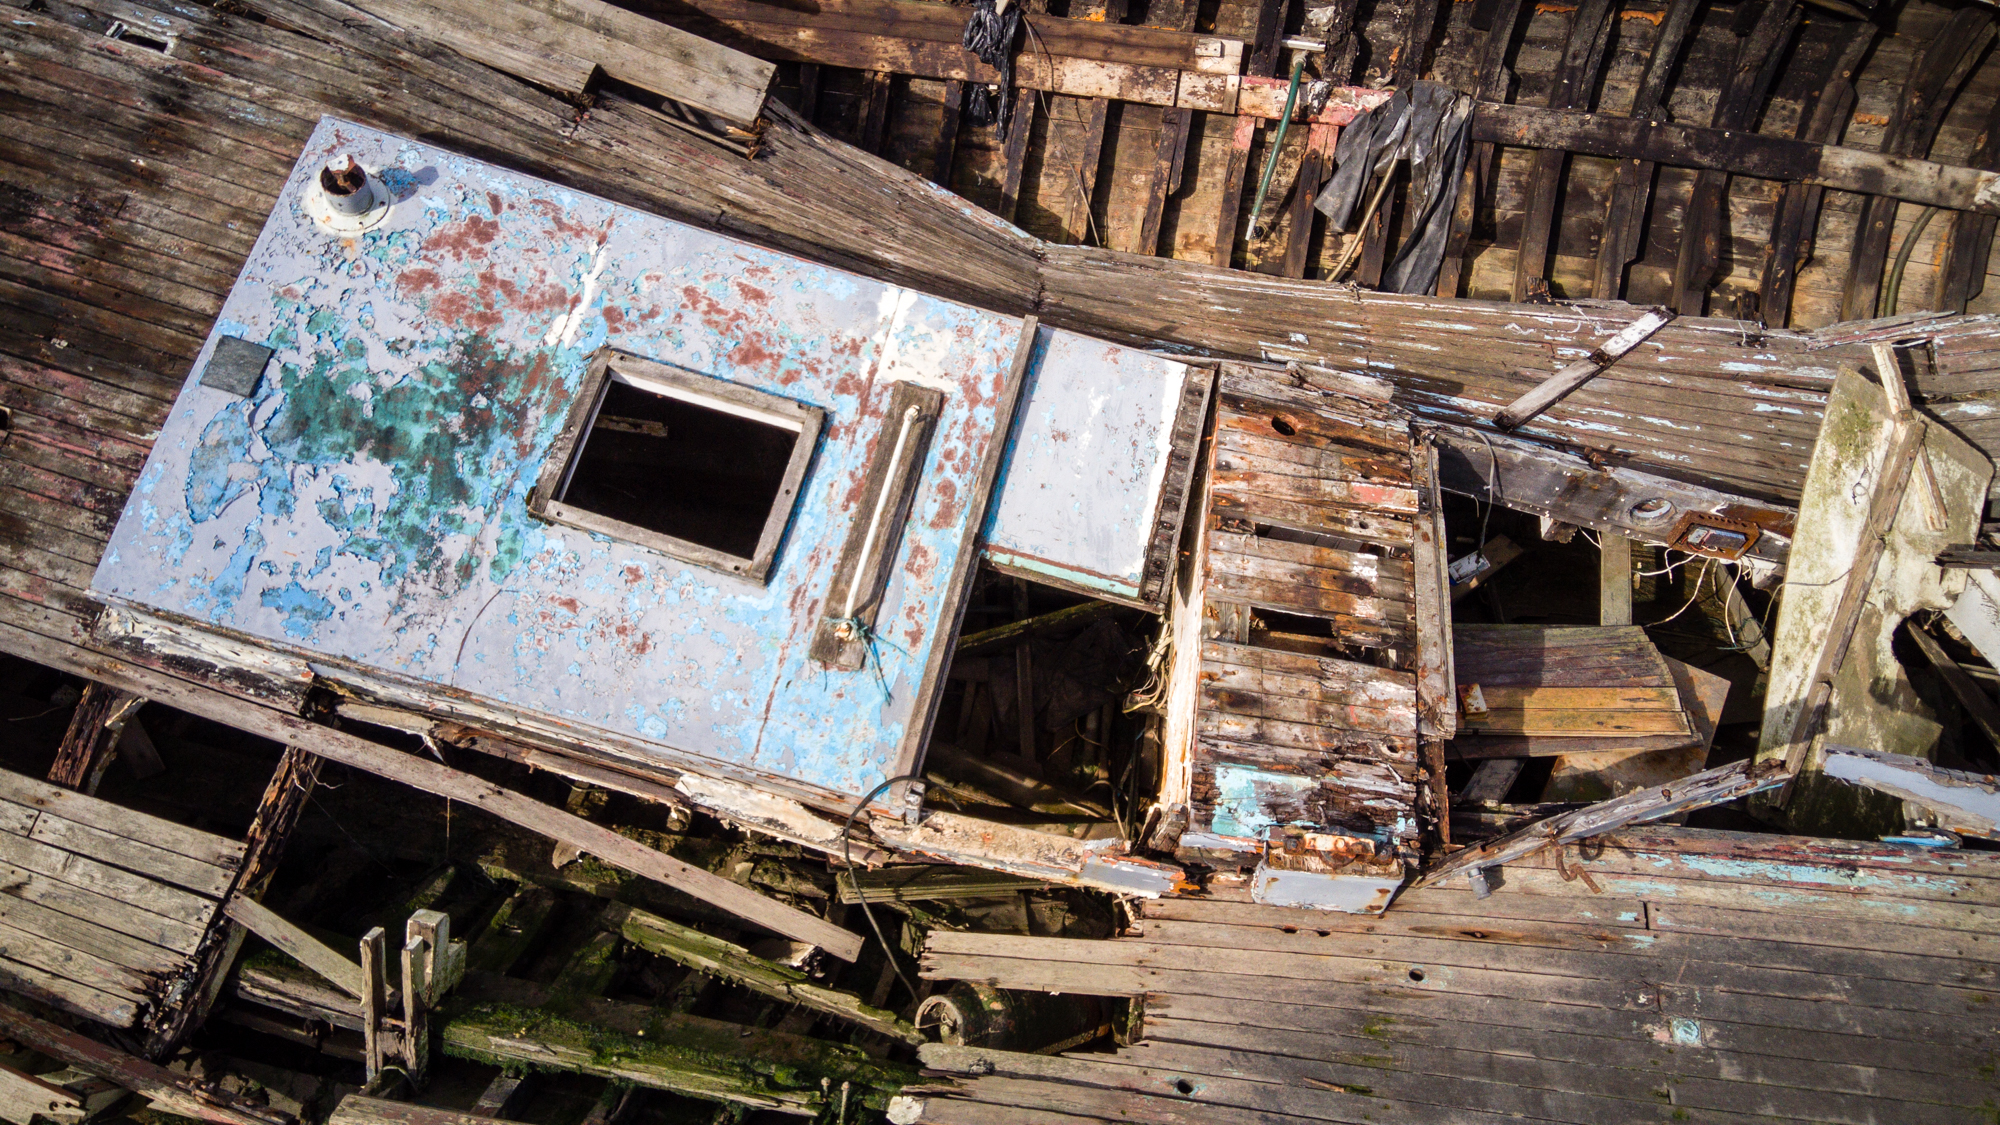 Photo of derelict boats taken with the Potensic Atom drone